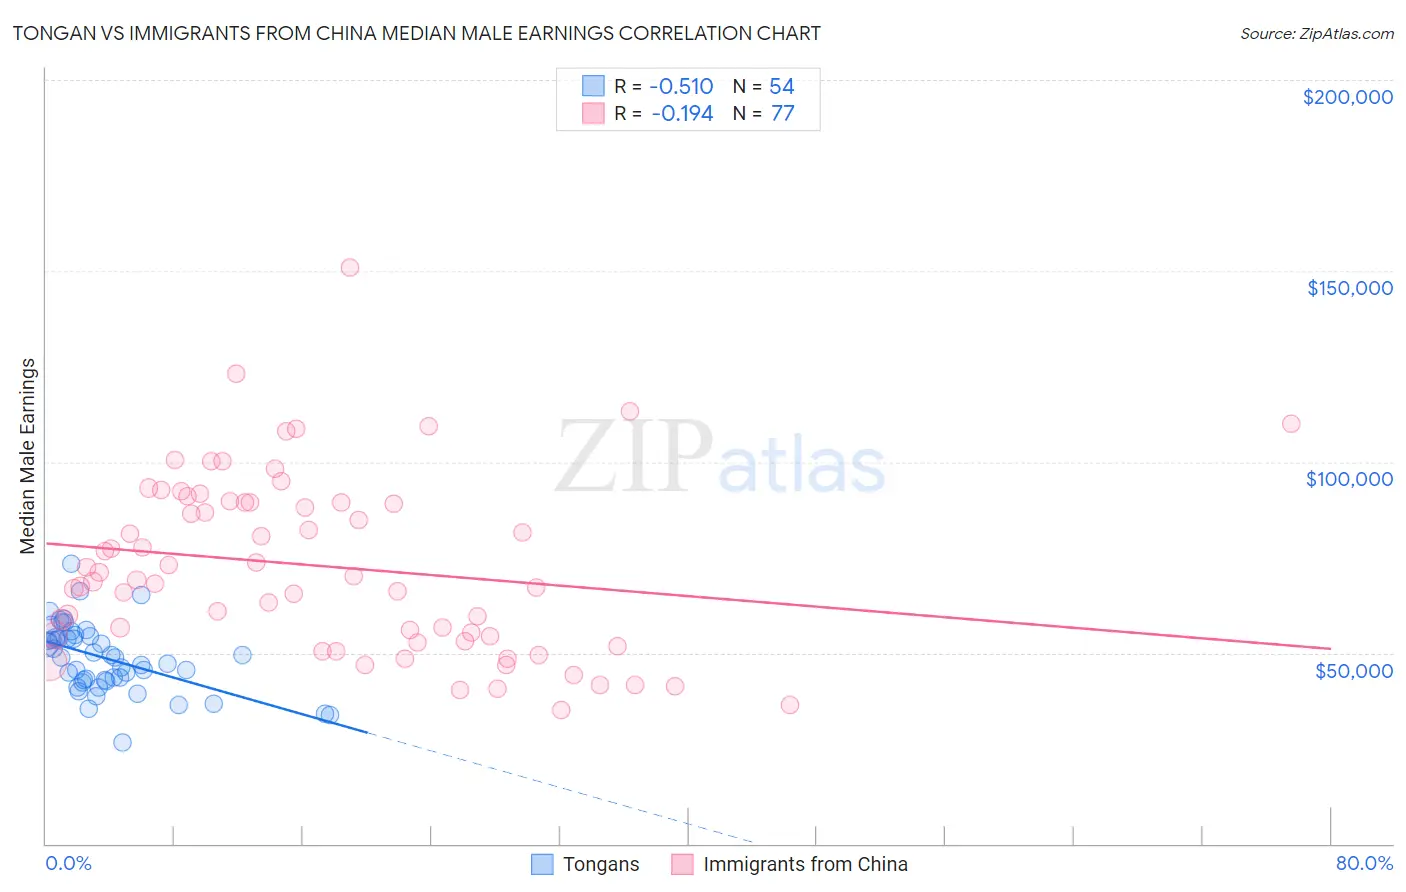 Tongan vs Immigrants from China Median Male Earnings